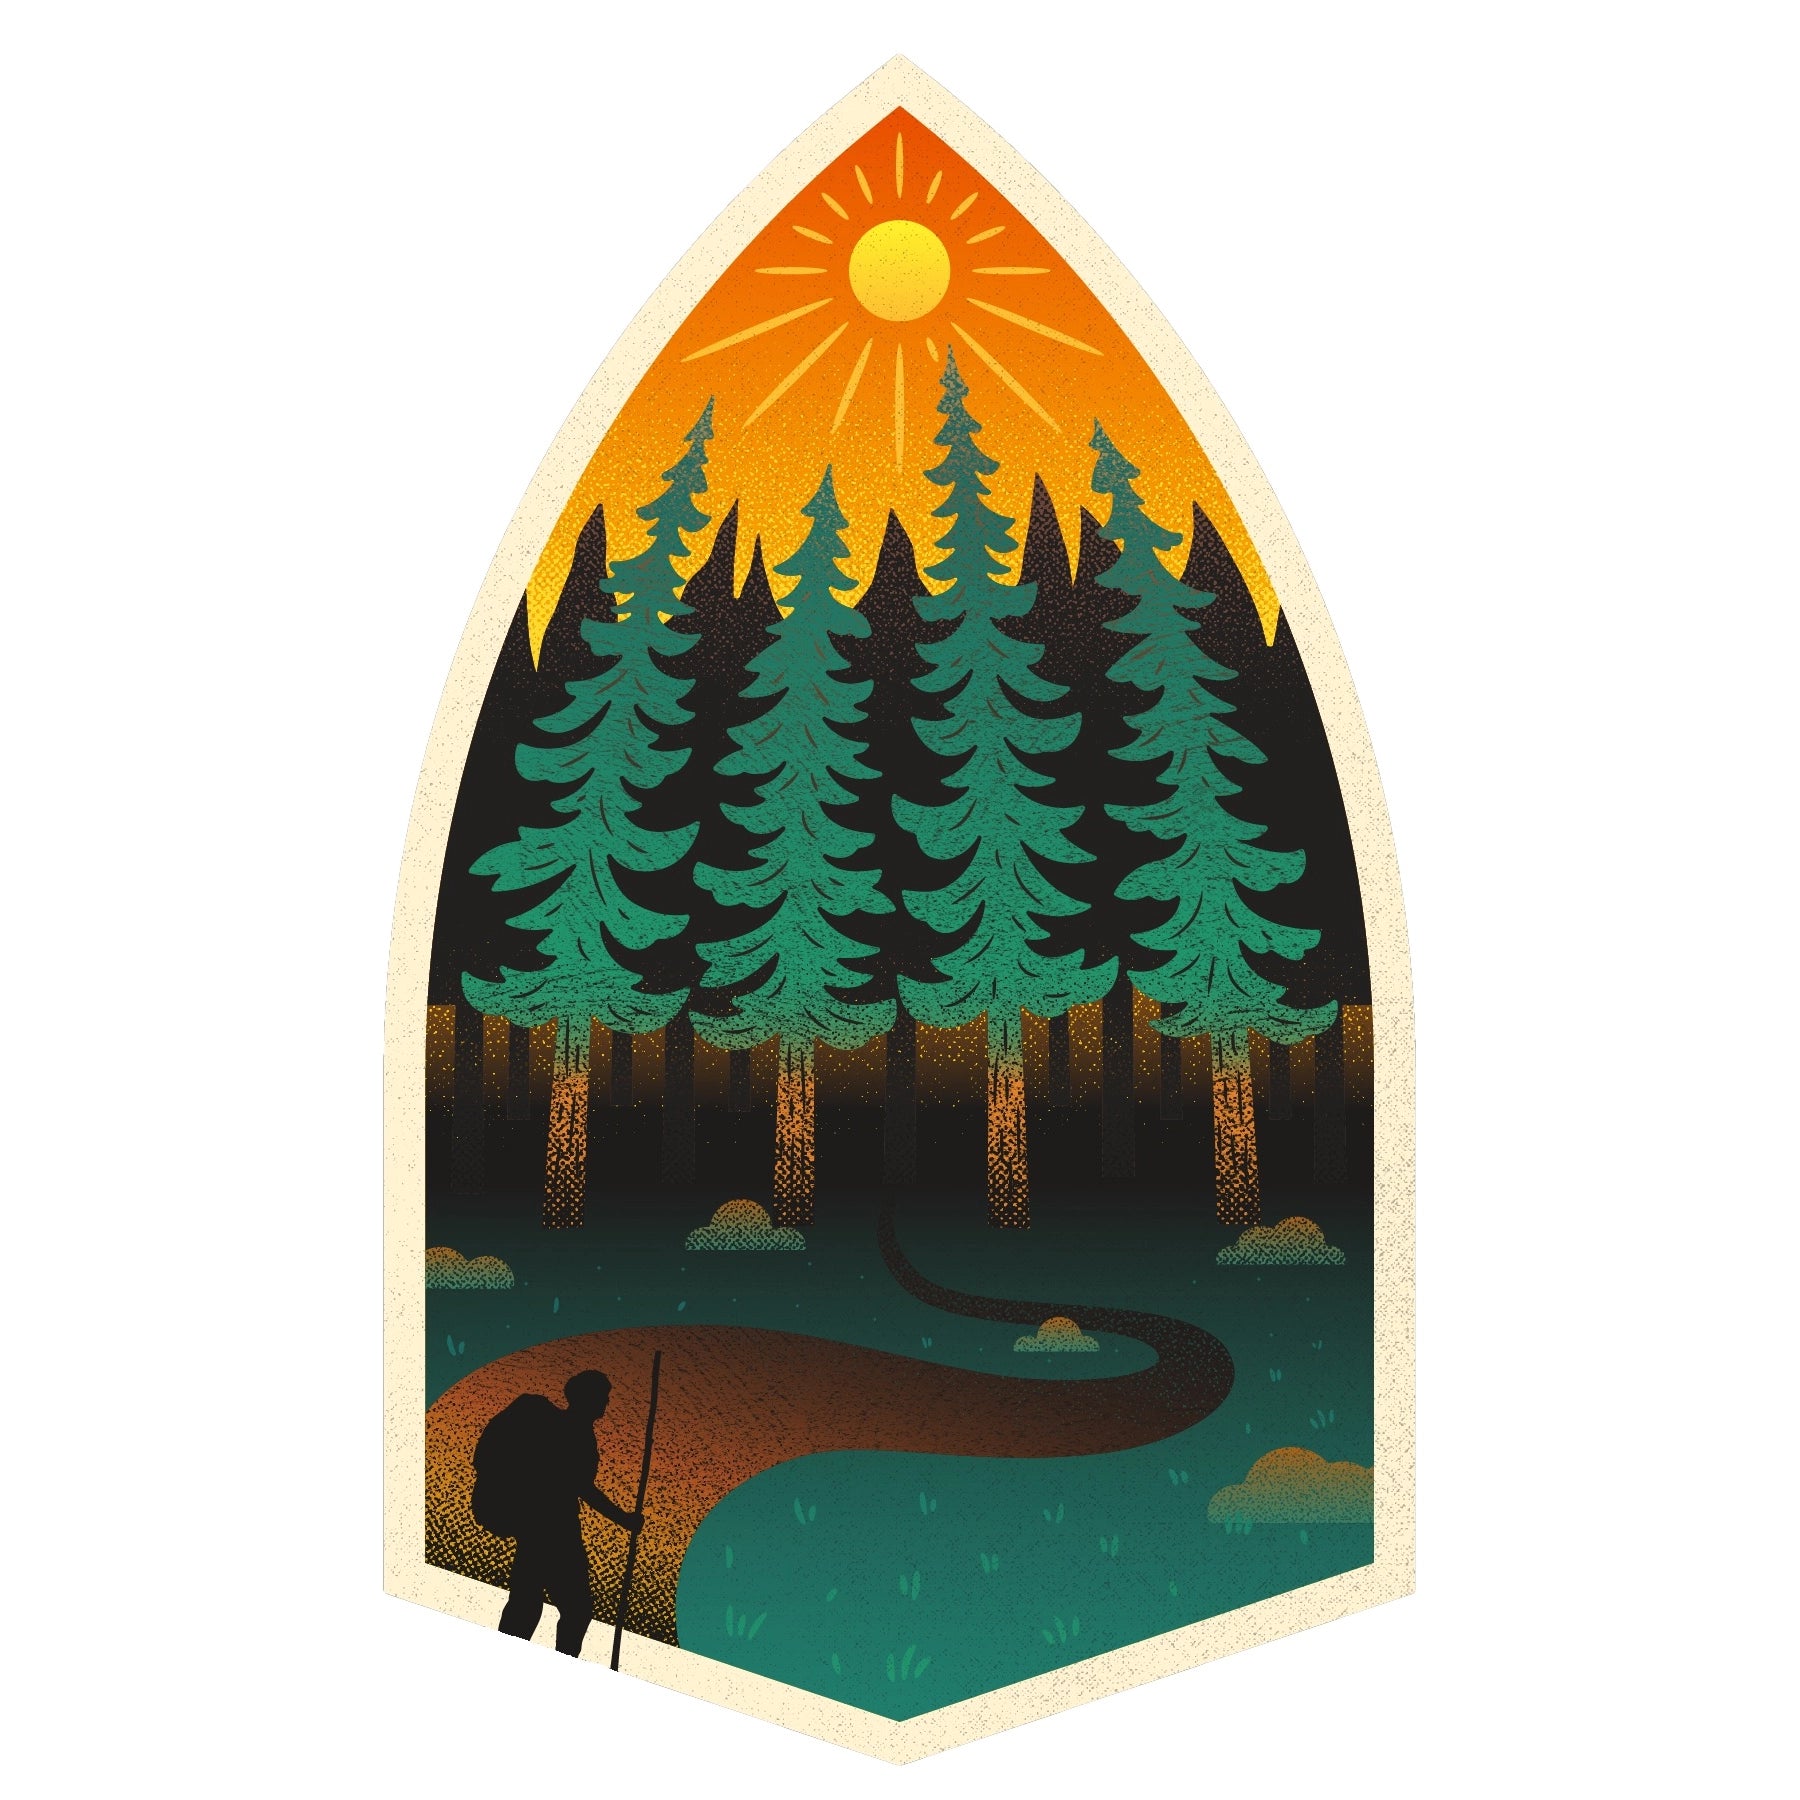 Among The Pines Hiking stickers - Nature Decals